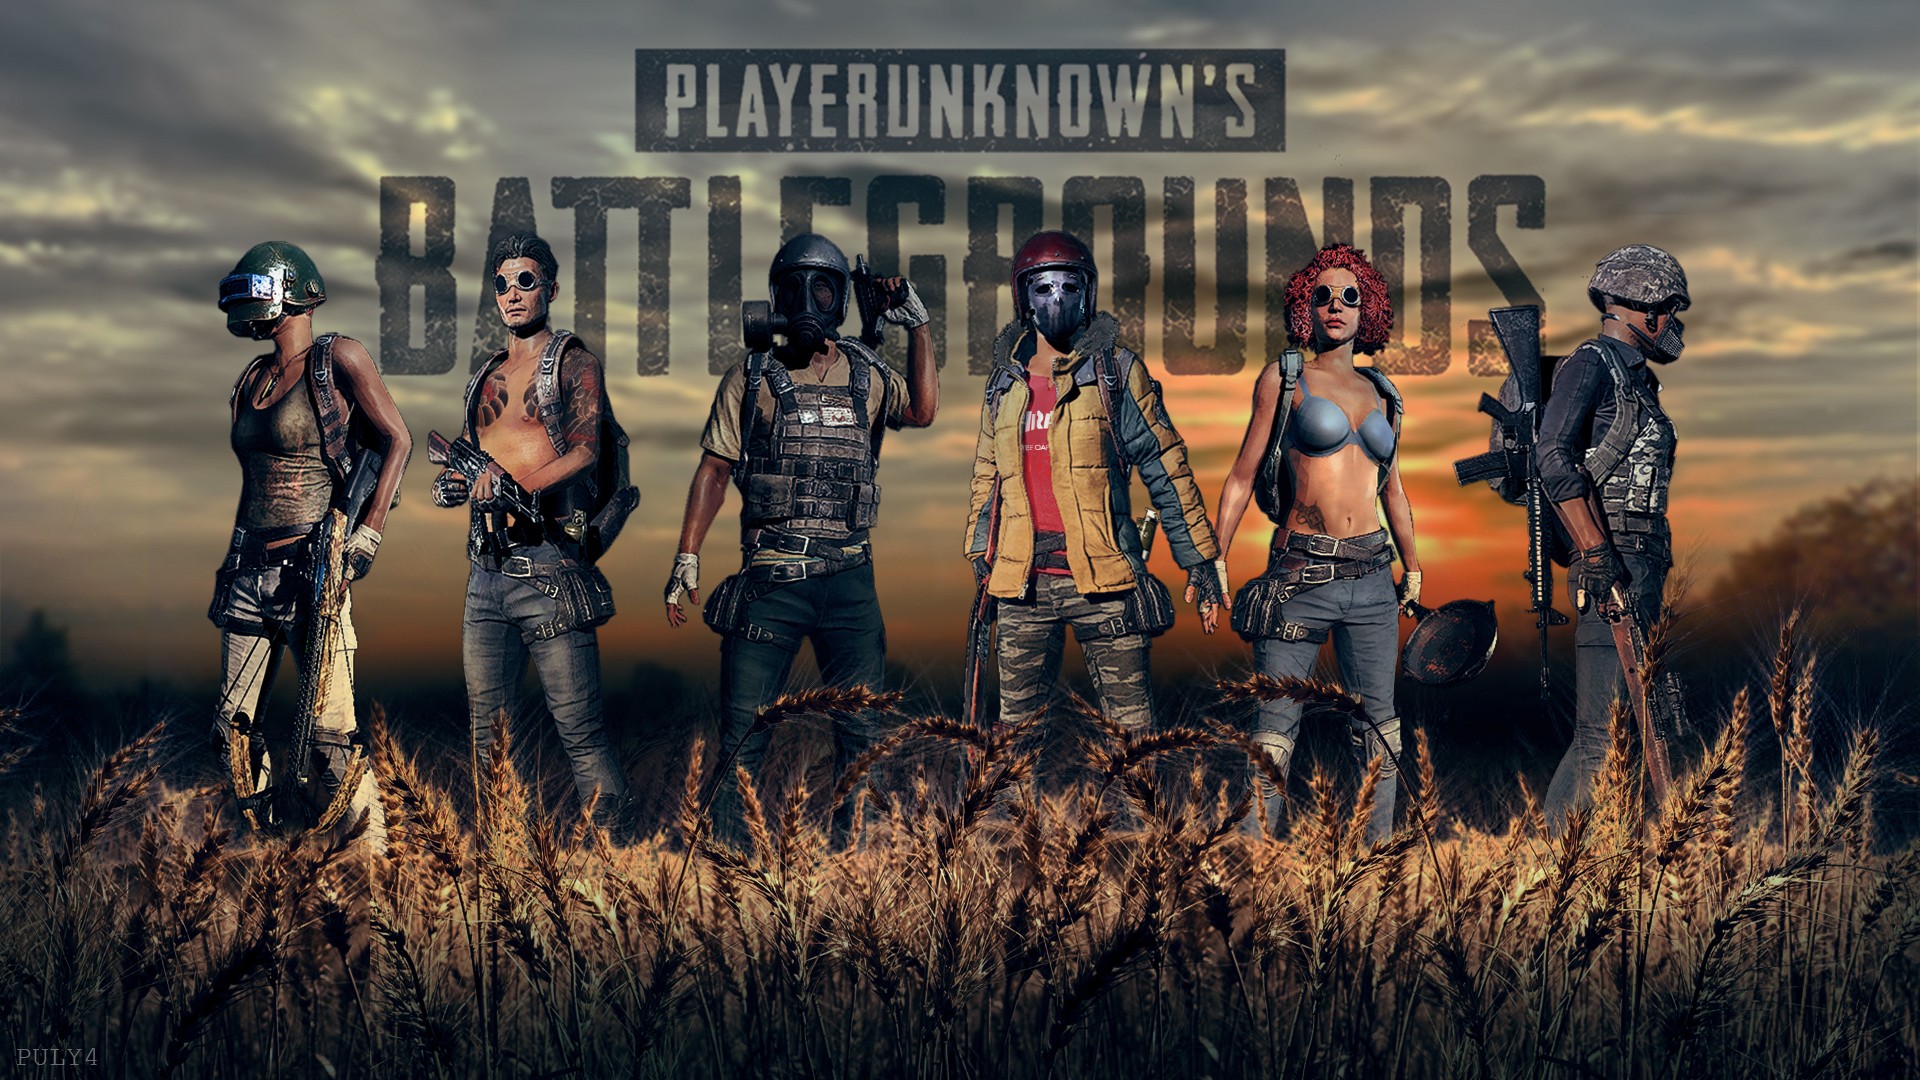 Desktop Wallpaper PUBG with resolution 1920X1080 pixel. You can use this wallpaper as background for your desktop Computer Screensavers, Android or iPhone smartphones